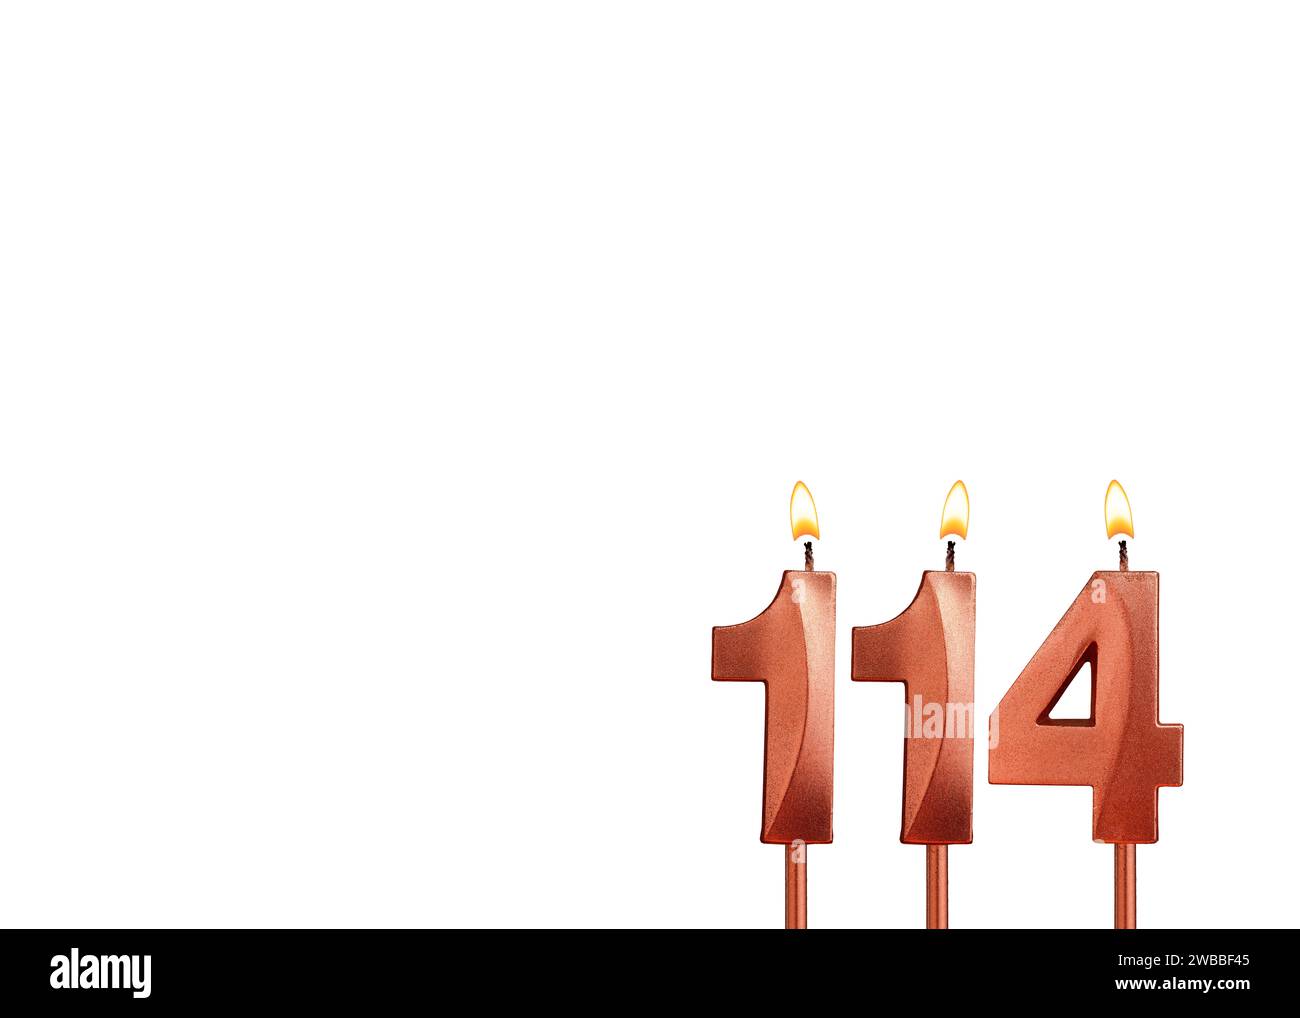 Burning candle number 114 for birthday on white background Stock Photo